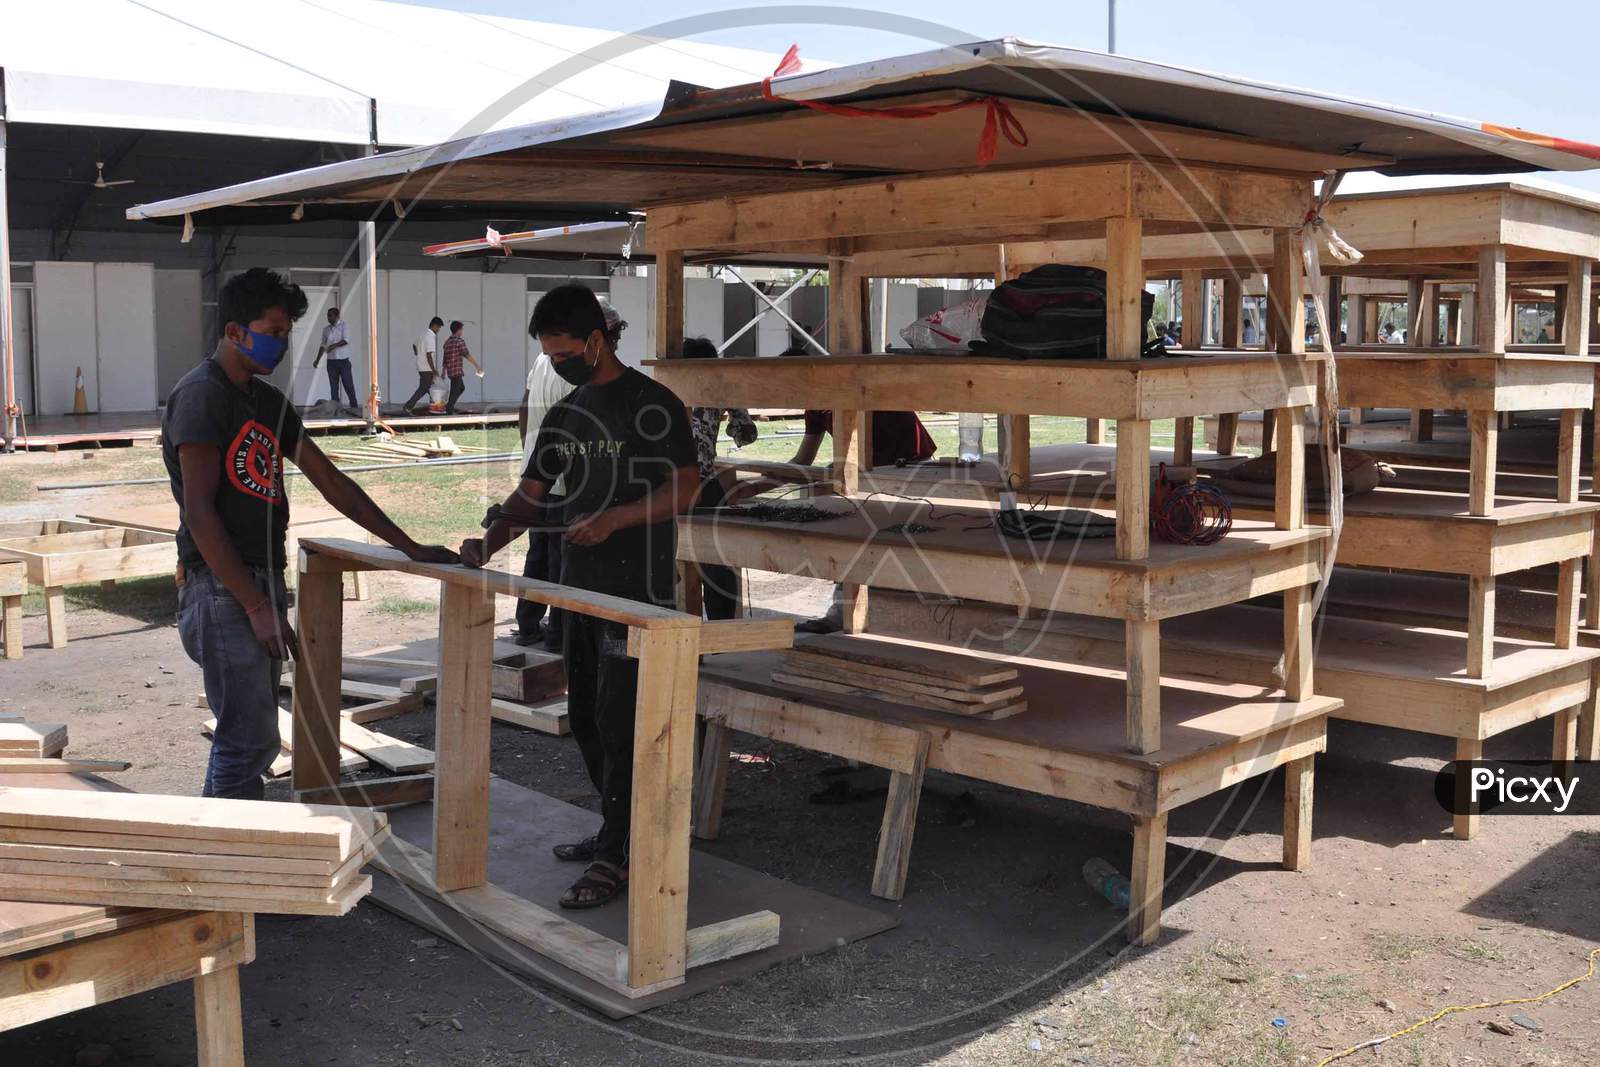 Workers Work On A Construction Of A Quarantine Center  At The Sarusajai Sports Complex During A Government-Imposed Nationwide Lockdown As A Preventive Measure Against The Covid-19 Coronavirus In Guwahati,India